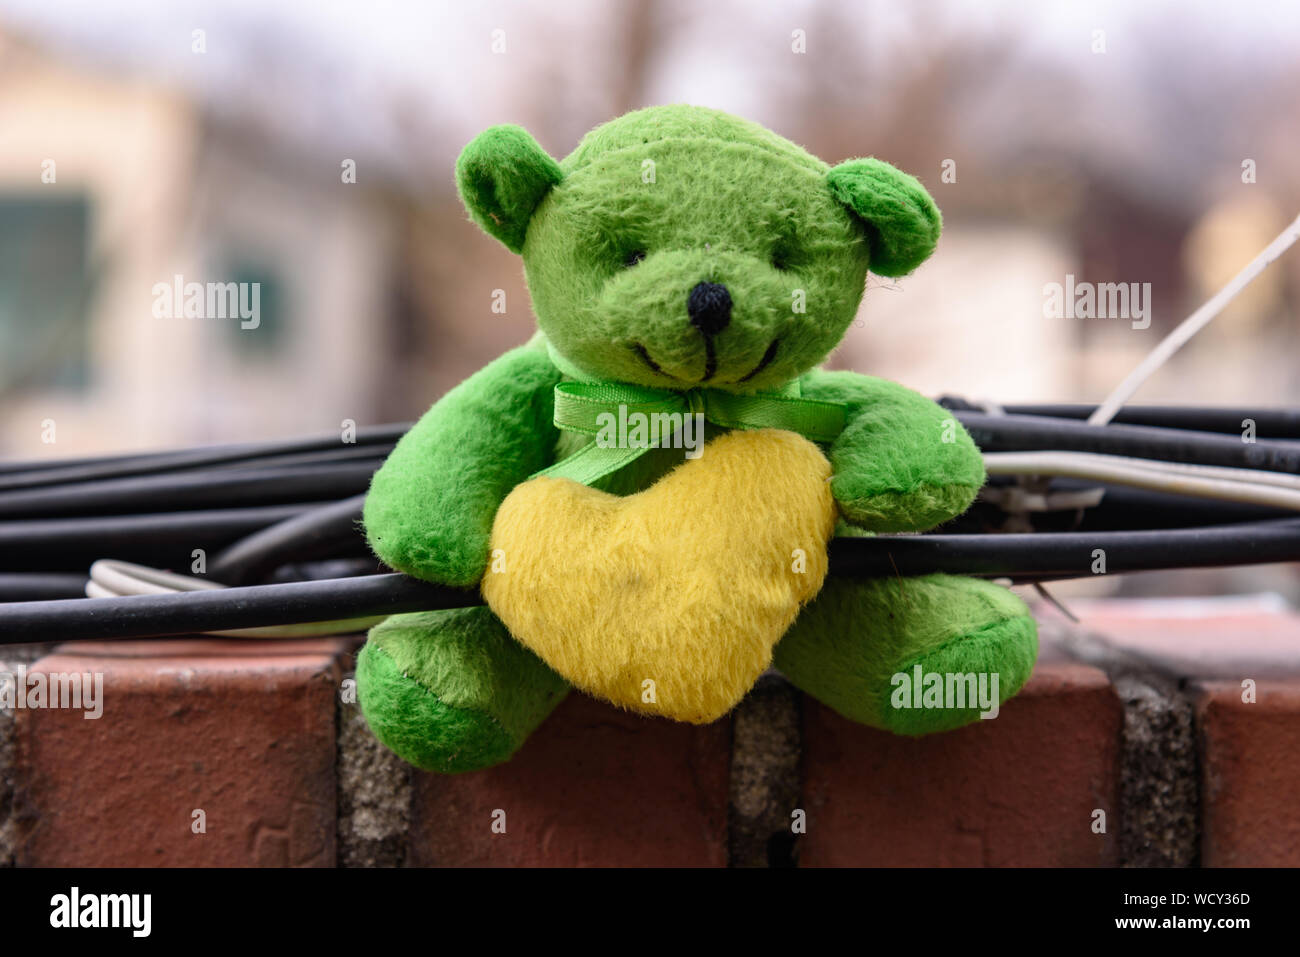 Close-up Of Green Teddy Bear With Yellow Heart Shape Amidst Cables On Brick Wall Stock Photo